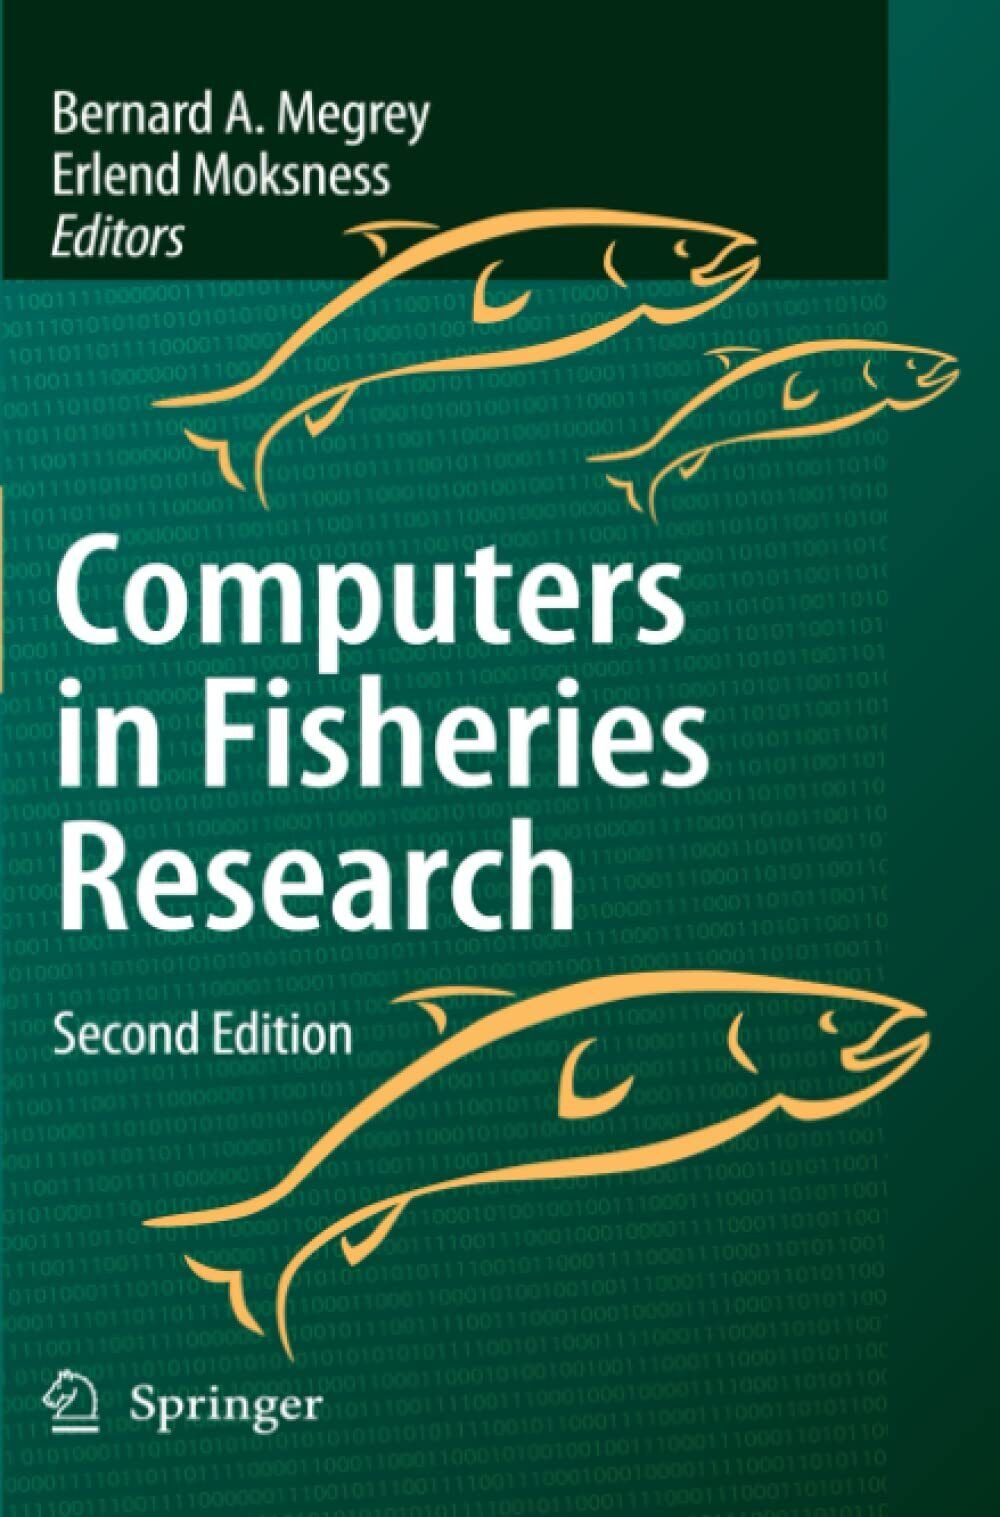 Computers in Fisheries Research - Bernard A. Megrey - Springer, 2010 libro usato